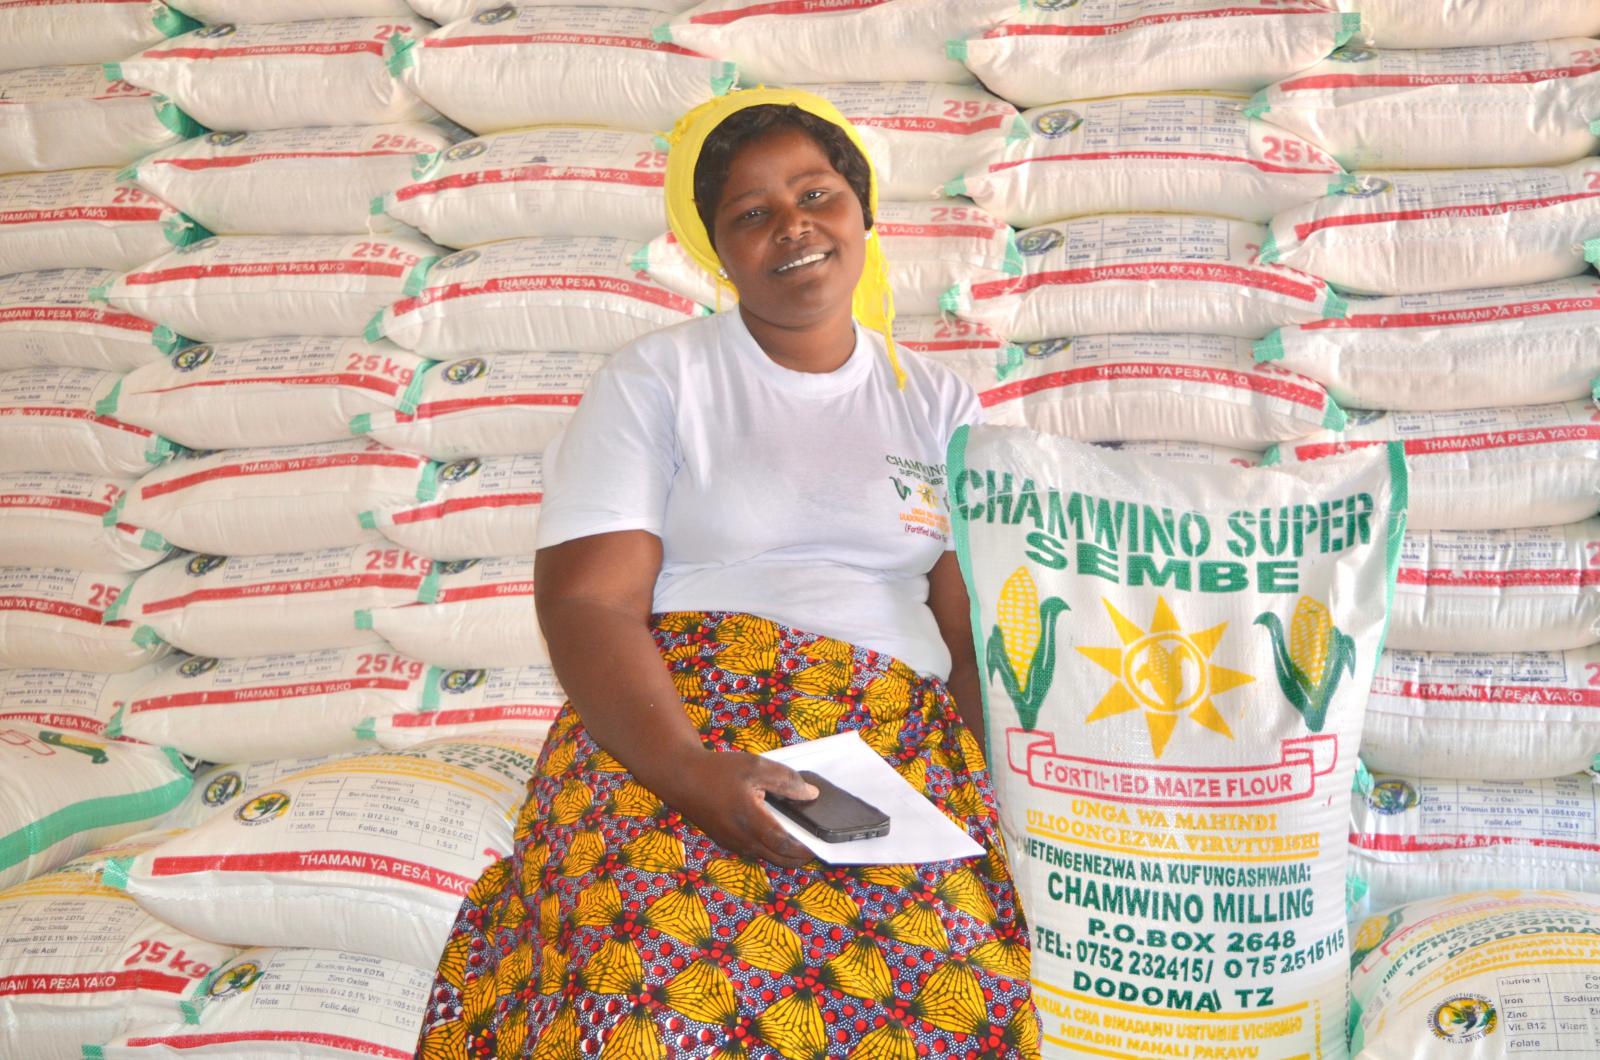 Woman posing with many sacks of maize flour